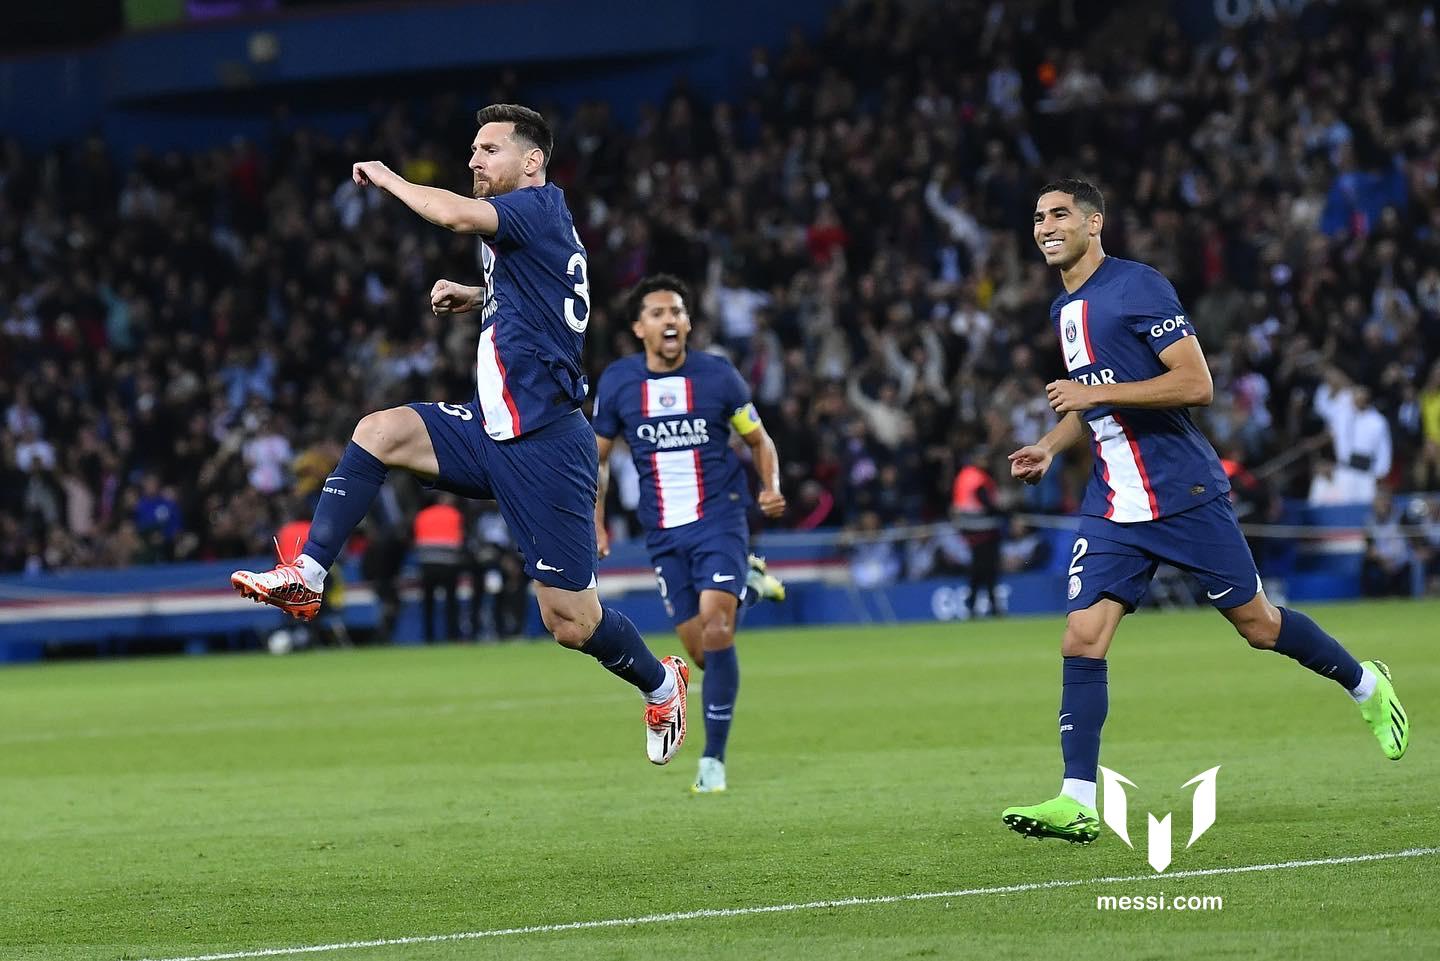 PSG CLAIM ANOTHER LIGUE 1 WIN